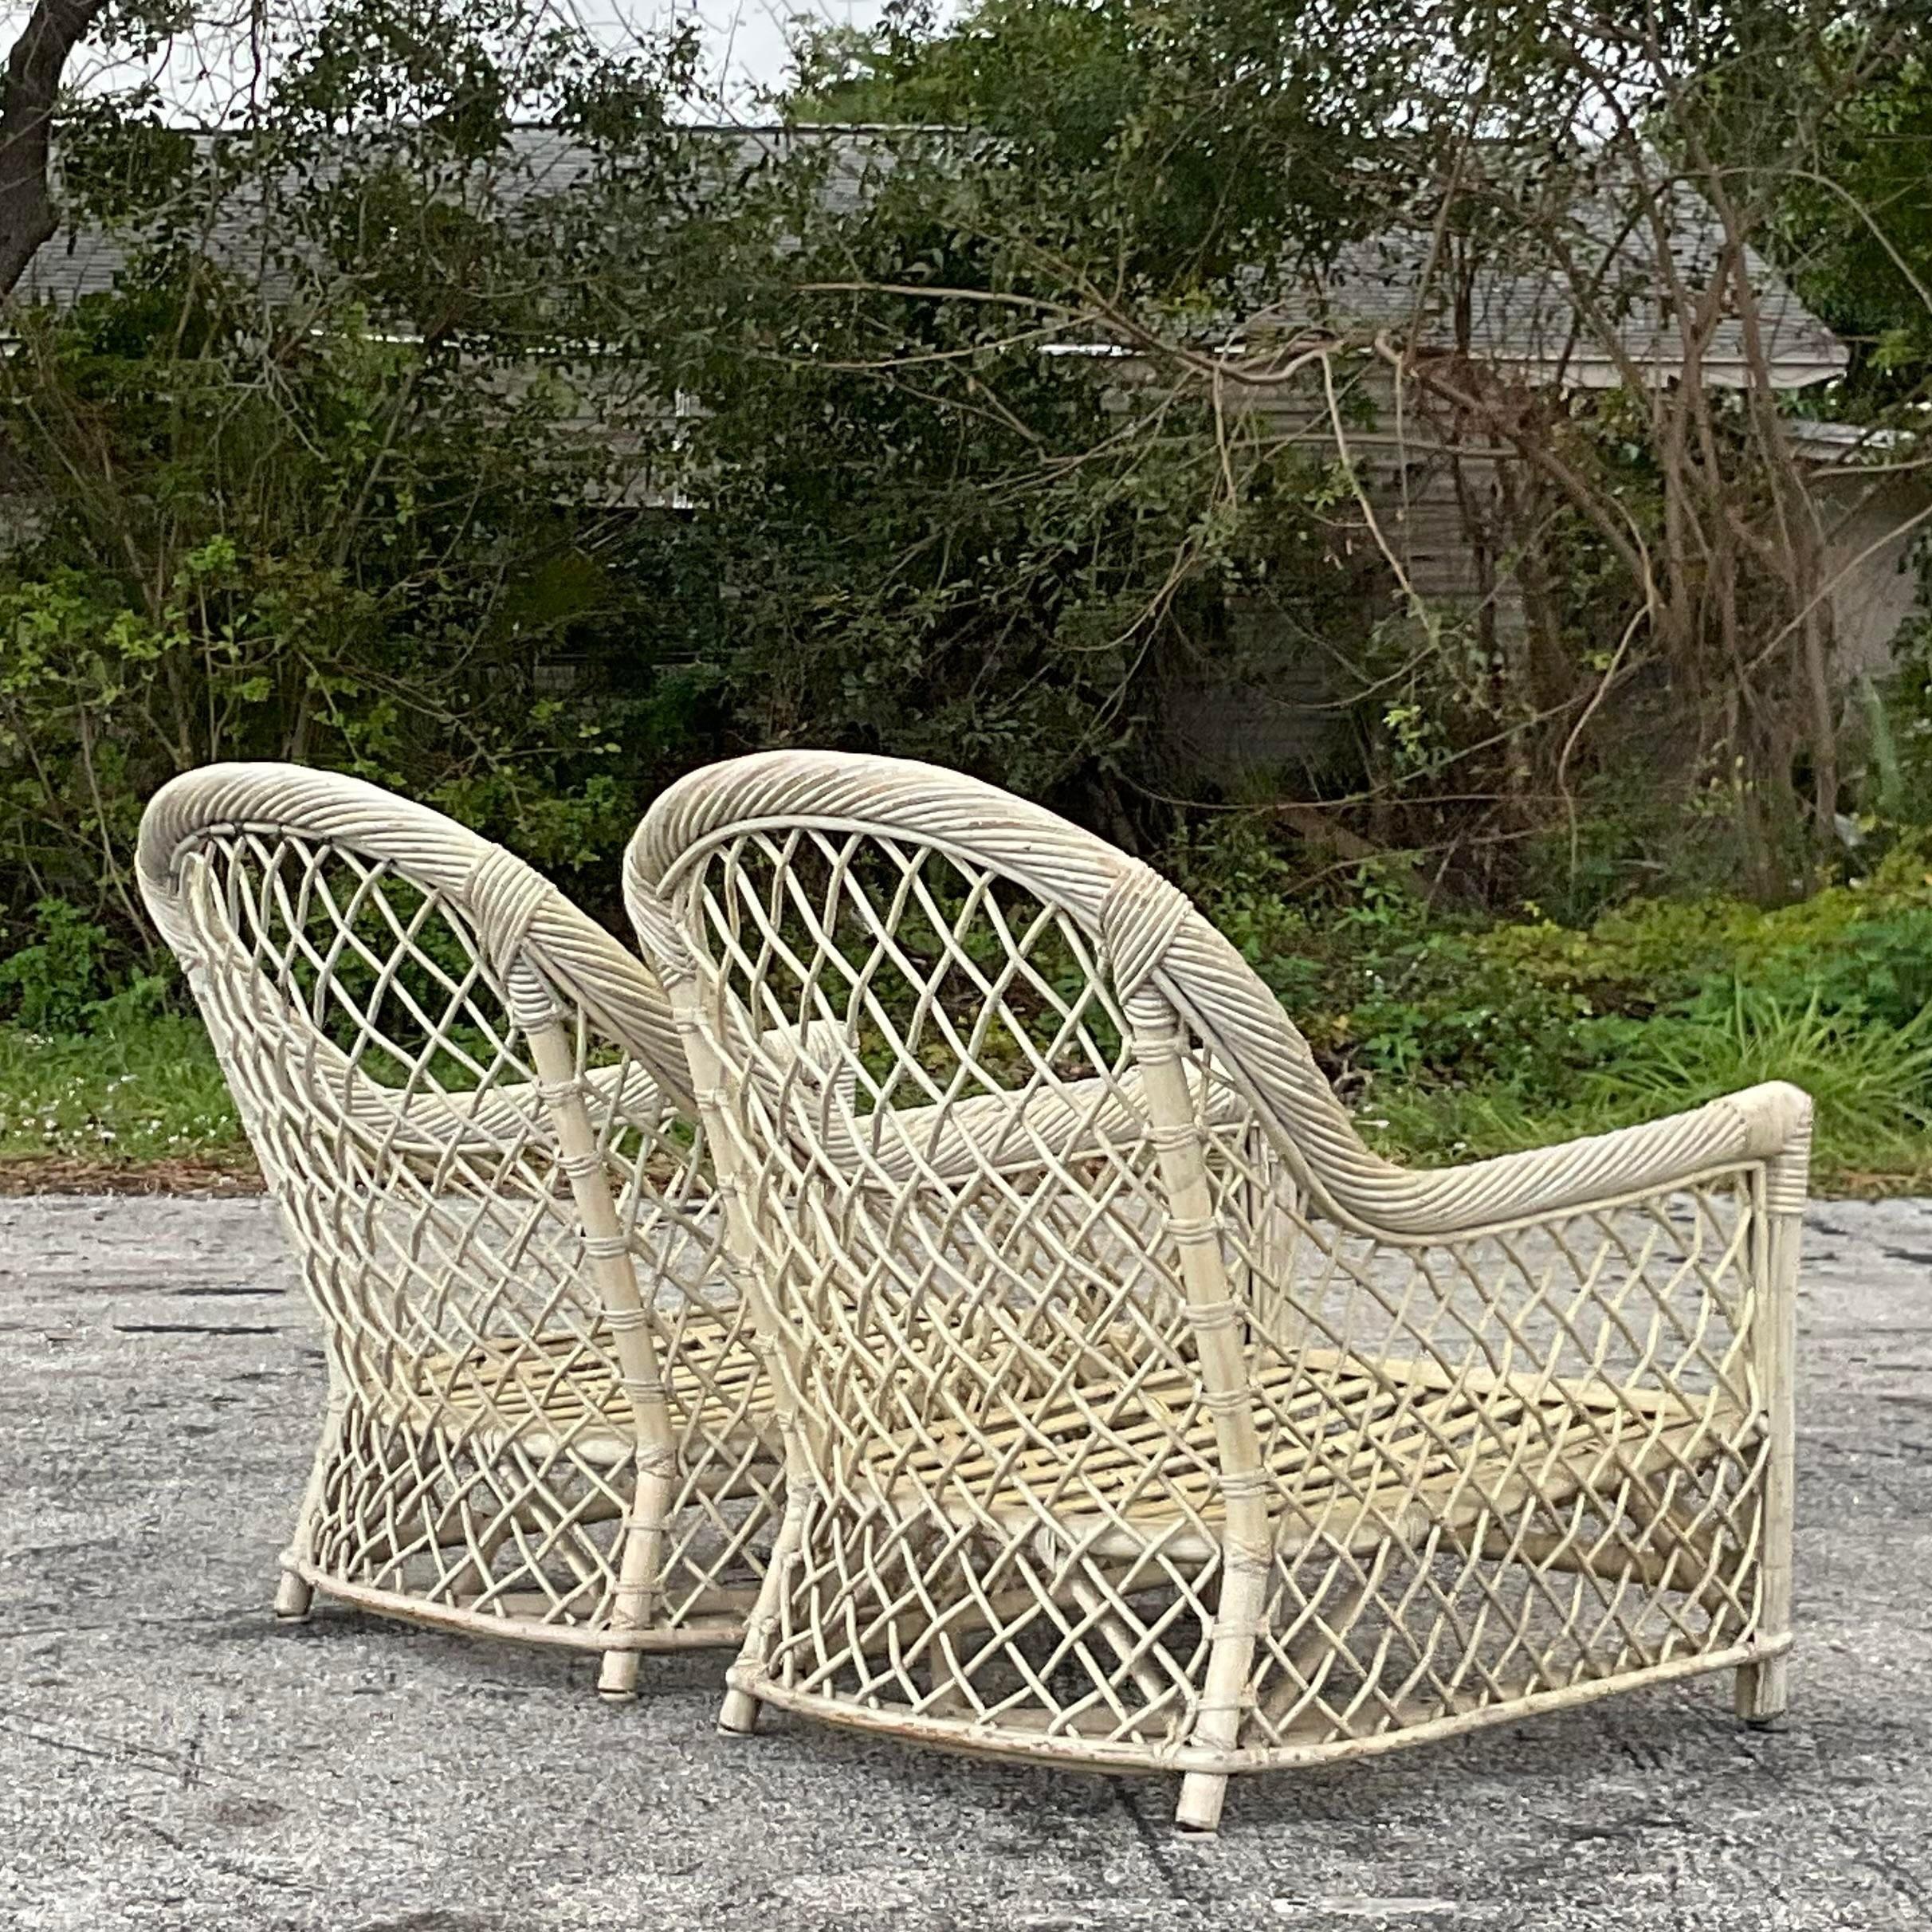 A fantastic pair of vintage Coastal Deauville lounge chairs. Chic trellis rattan in a pale sage green wash. Matching sofa also available on my page. Acquired from a Palm Beach estate.